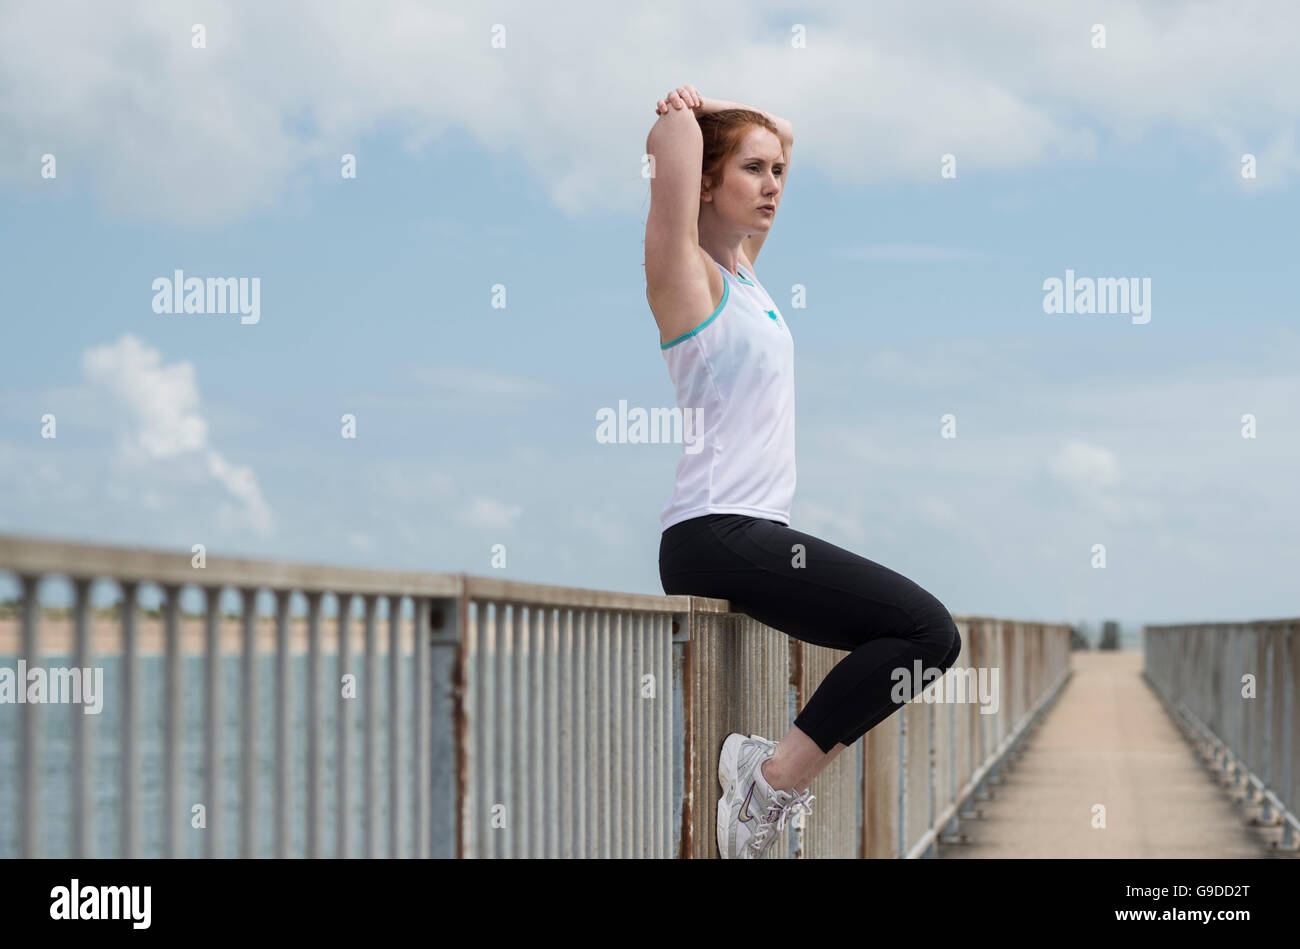 woman sitting on railings doing an arm stretch, outdoor exercise Stock Photo